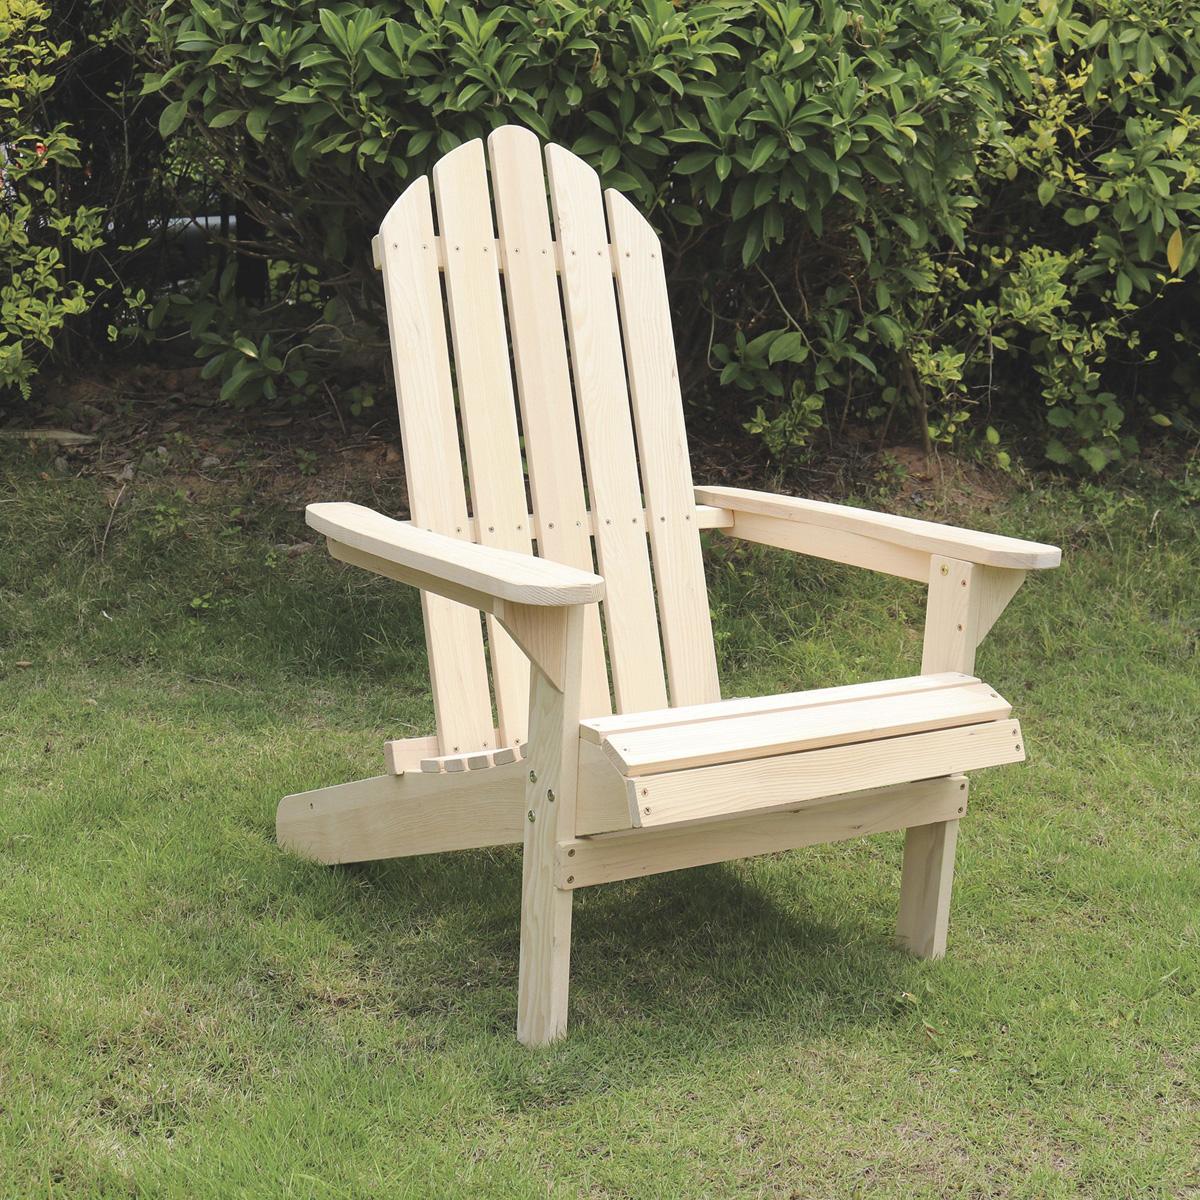 2 northbeam Classic Adirondack Natural Wood Chair Kit for $58 Shipped